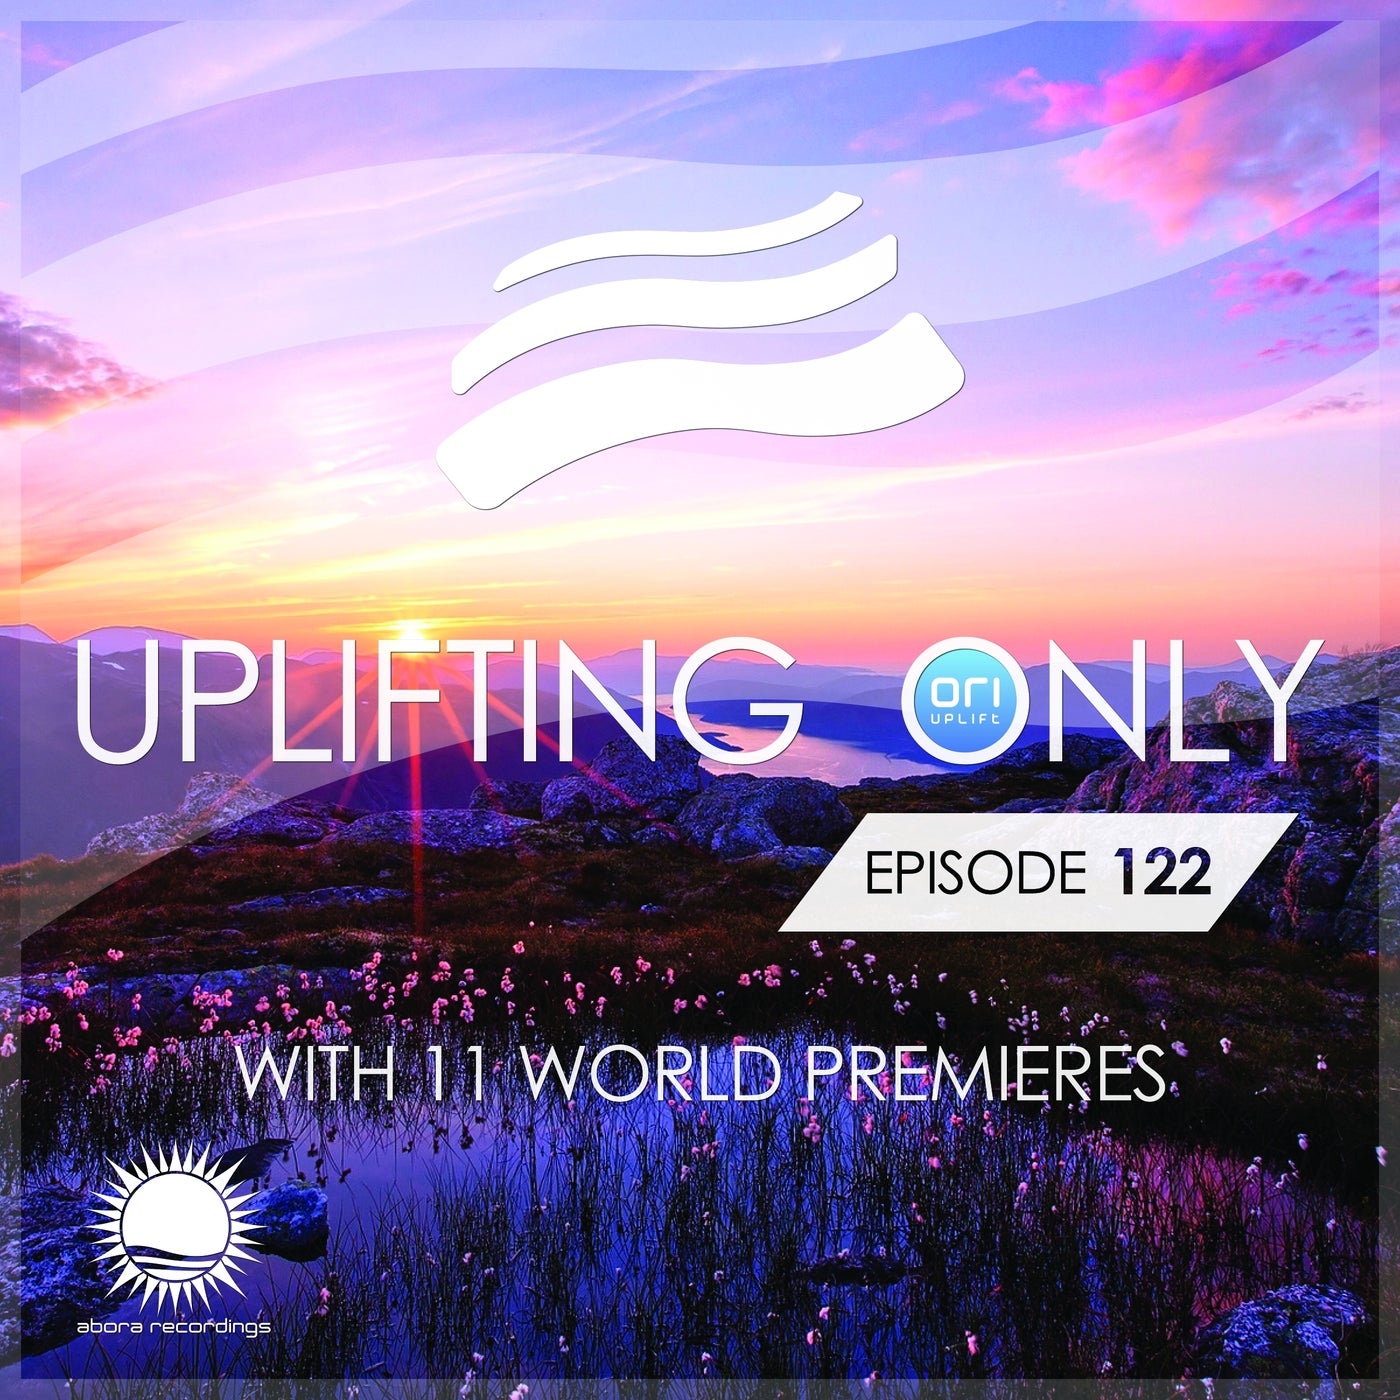 Uplifting Only Episode 122 (With 11 World Premieres)